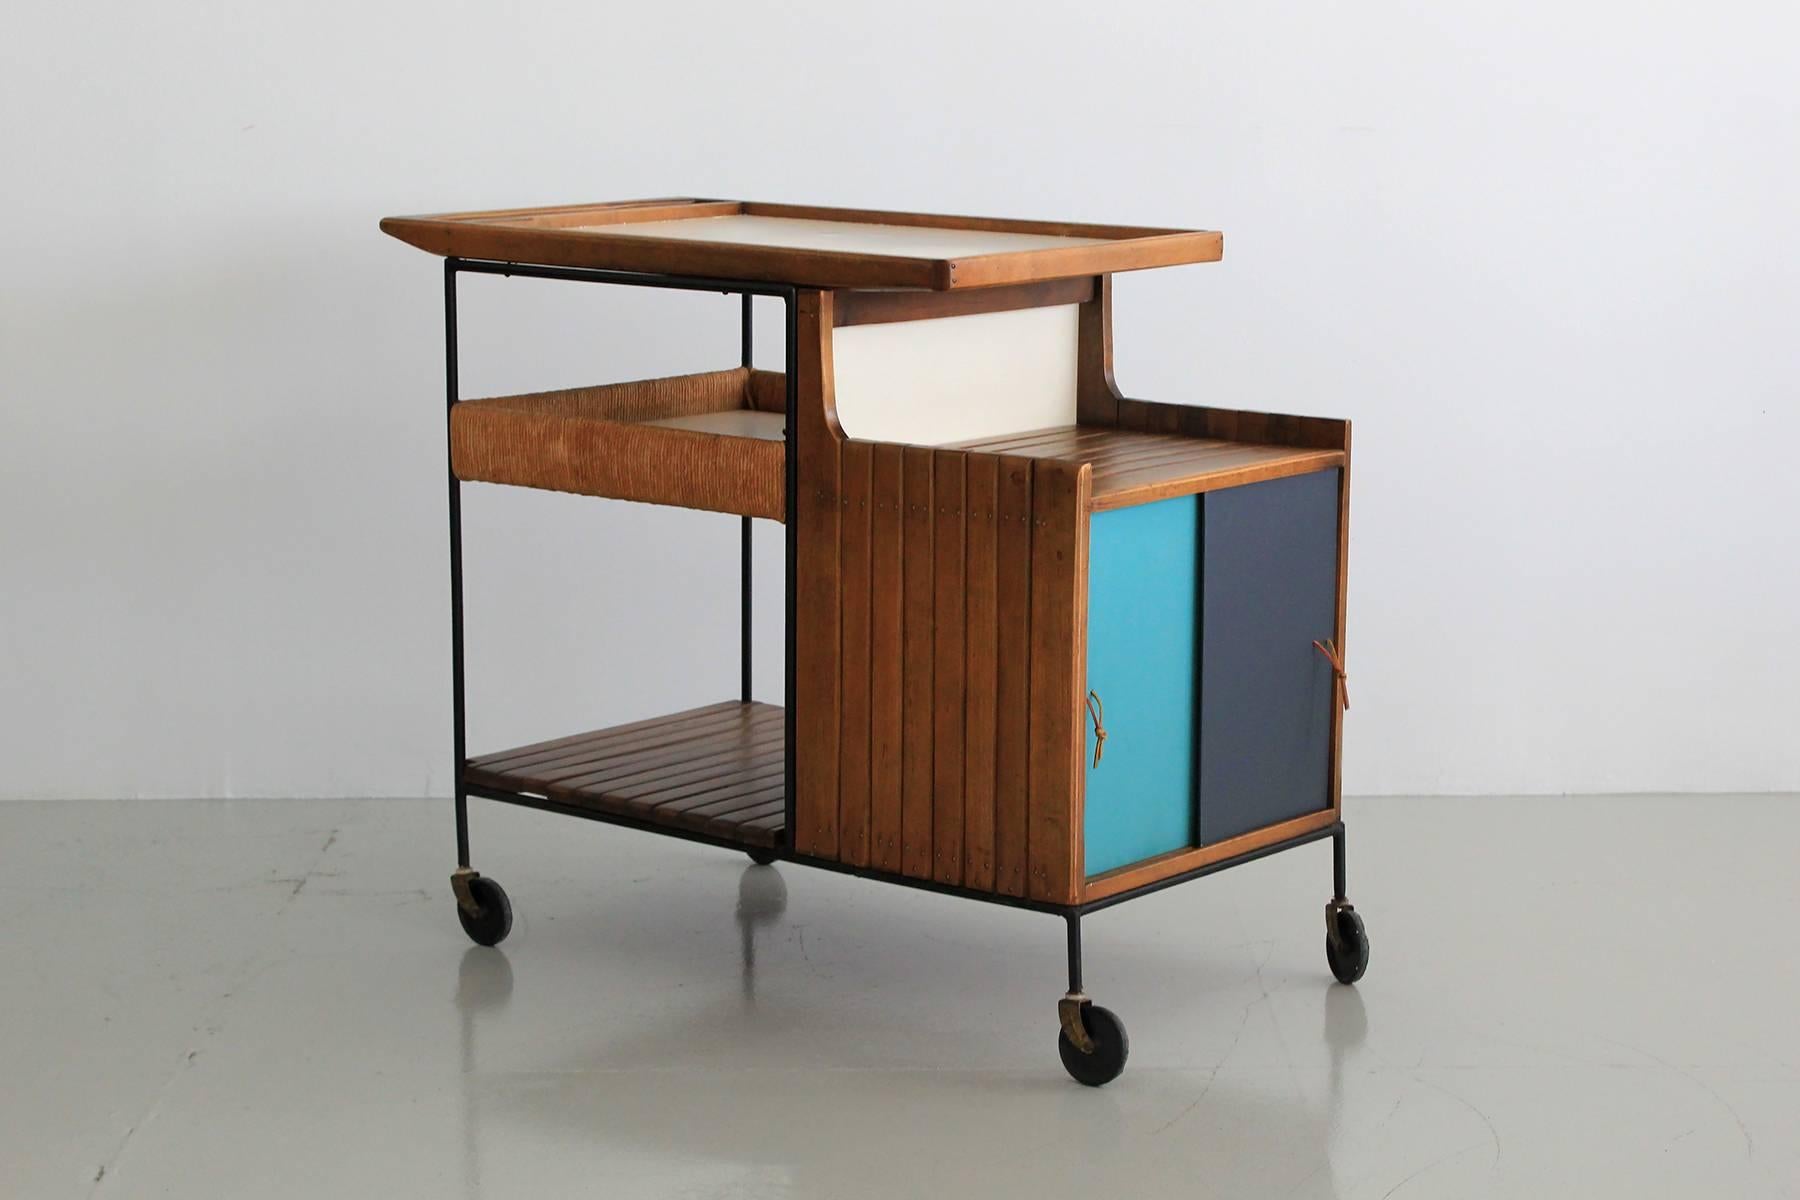 Great bar cart by Arthur Umanoff for Raymor. Black wrought iron frame, wood slat shelving, woven rushed storage compartment and sliding lacquered doors with extra storage. Great original vintage condition with original casters.